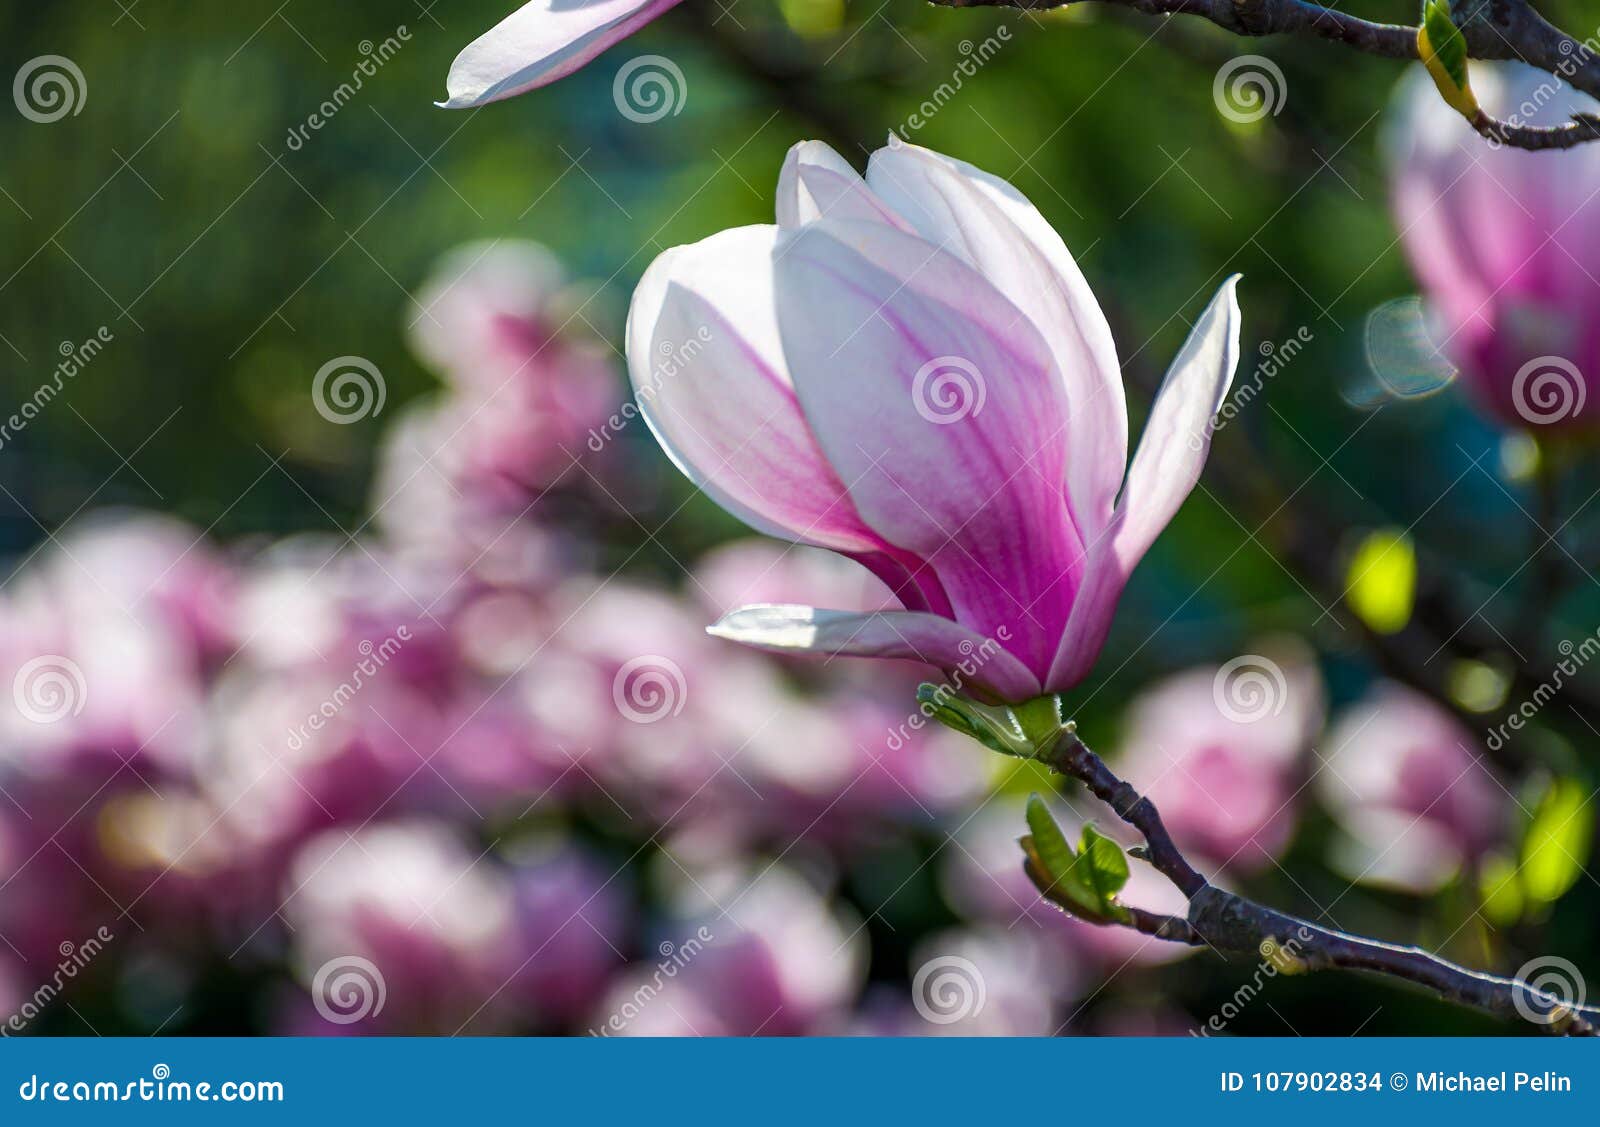 Magnolia Flower Blossom in Spring Stock Photo - Image of petals, life ...